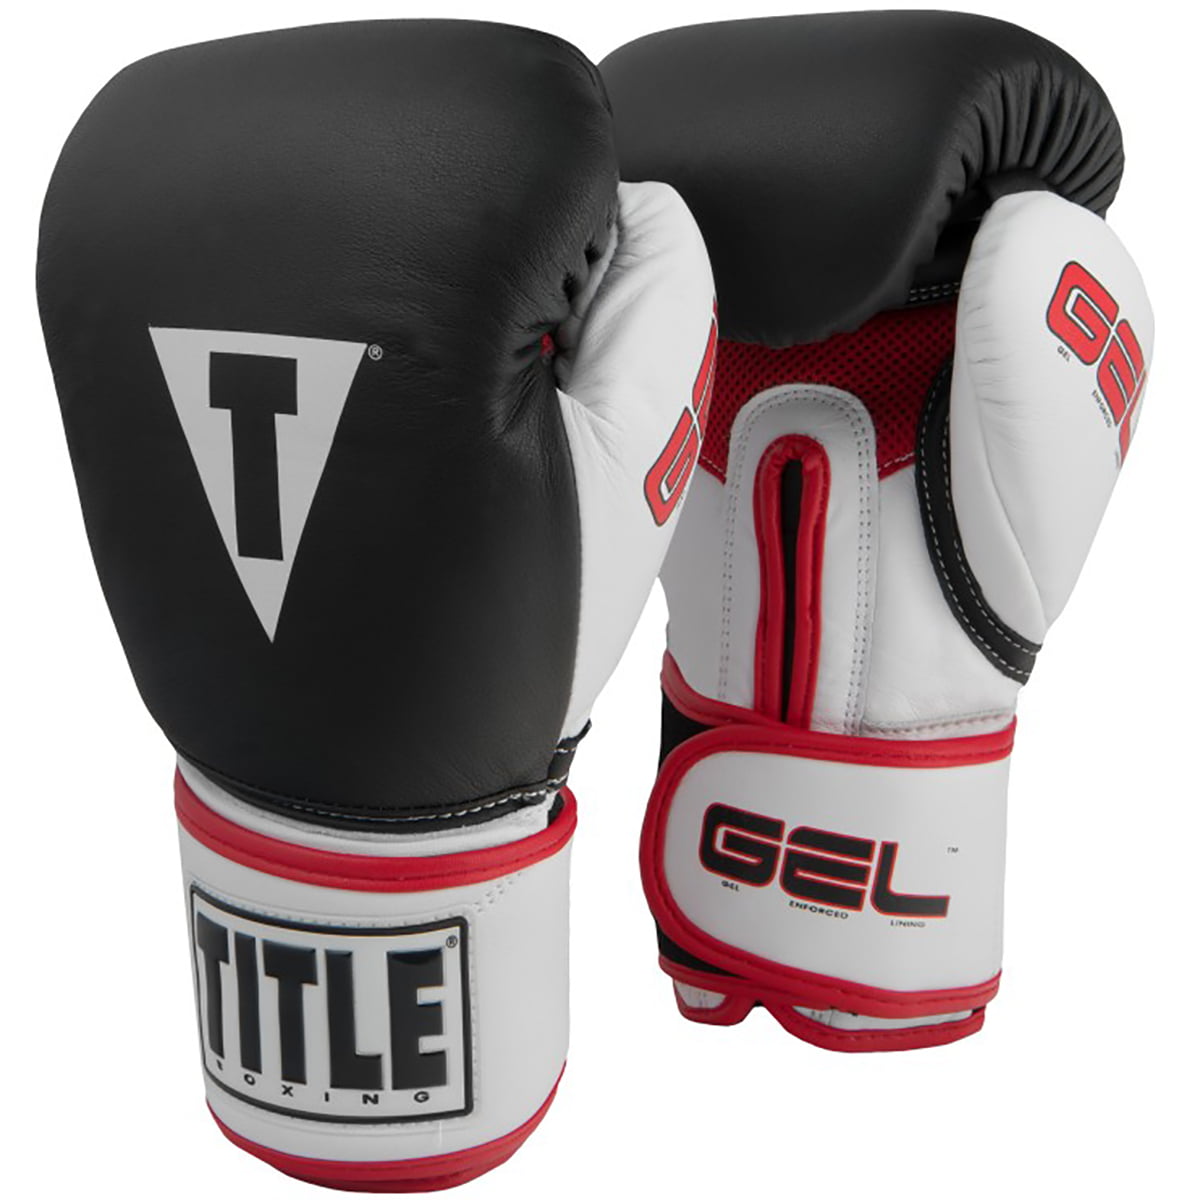 Black/White/Red Title Boxing Infused Foam Enthrall Hook & Loop Training Gloves 